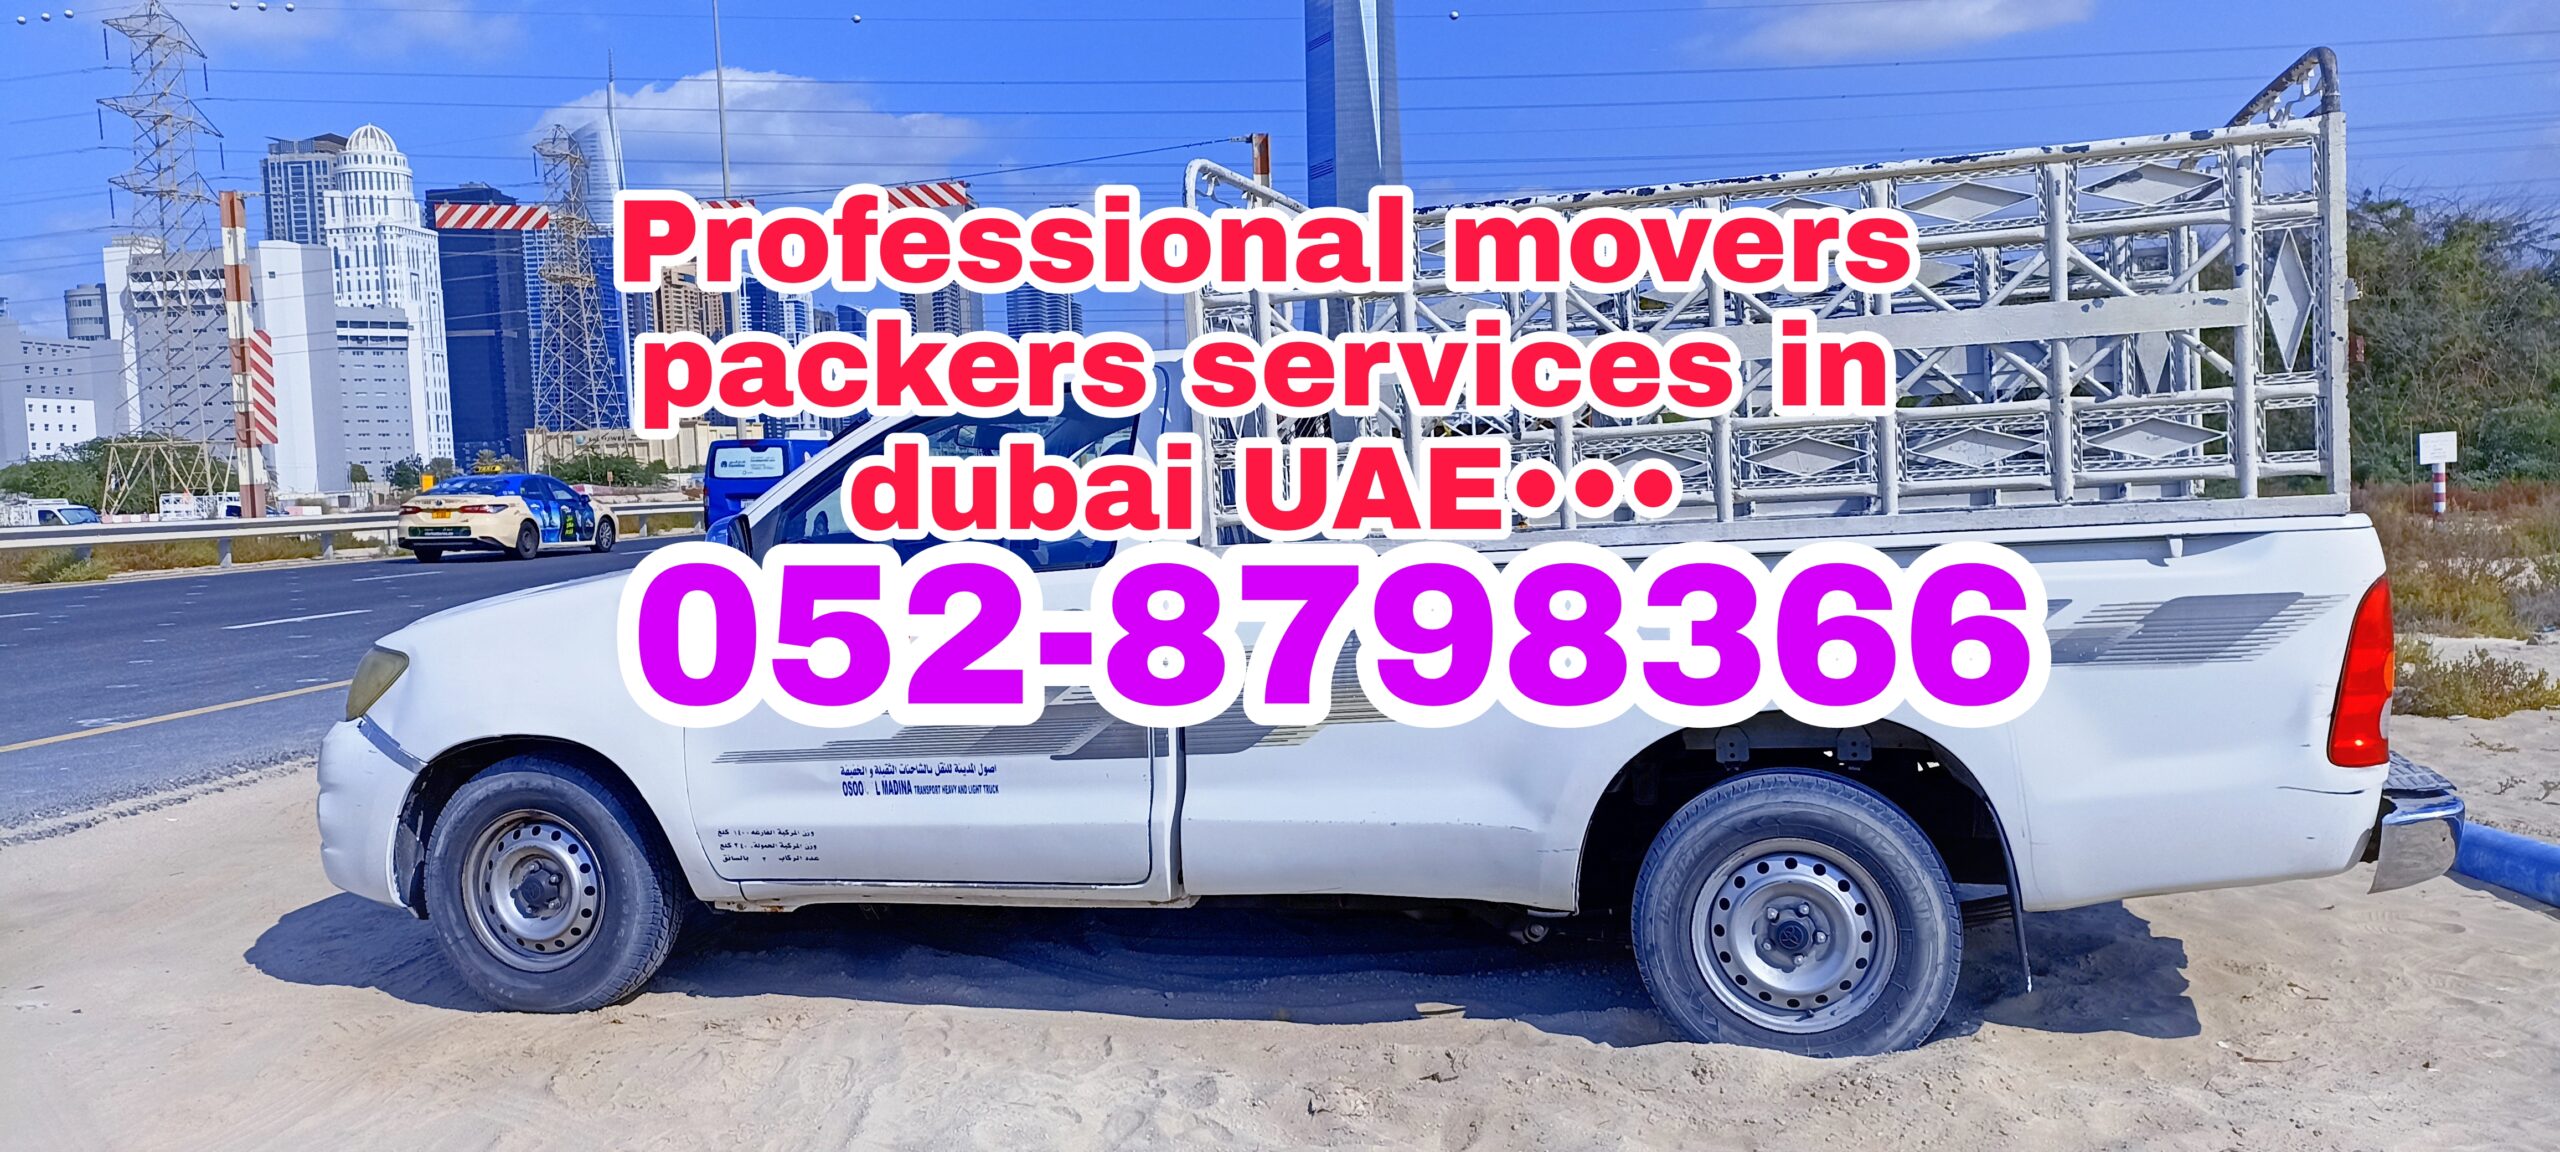 Movers packers services in dubai UAE available 0528798366